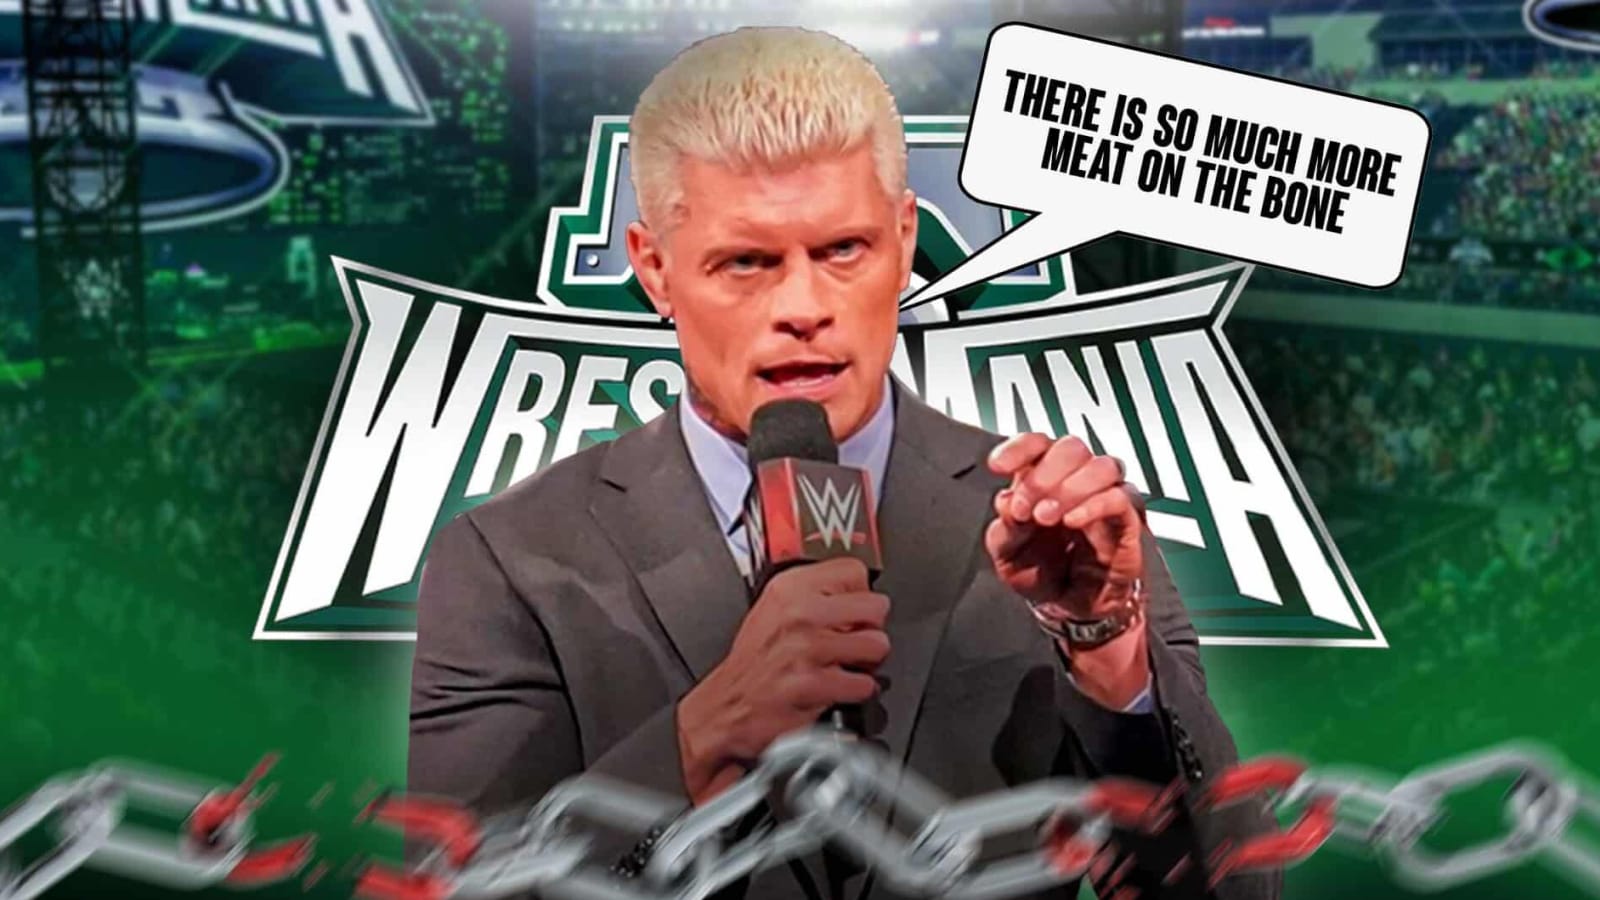 Cody Rhodes tells doubters that’s ‘more meat on the bone’ after winning the WWE Championship at WrestleMania 40